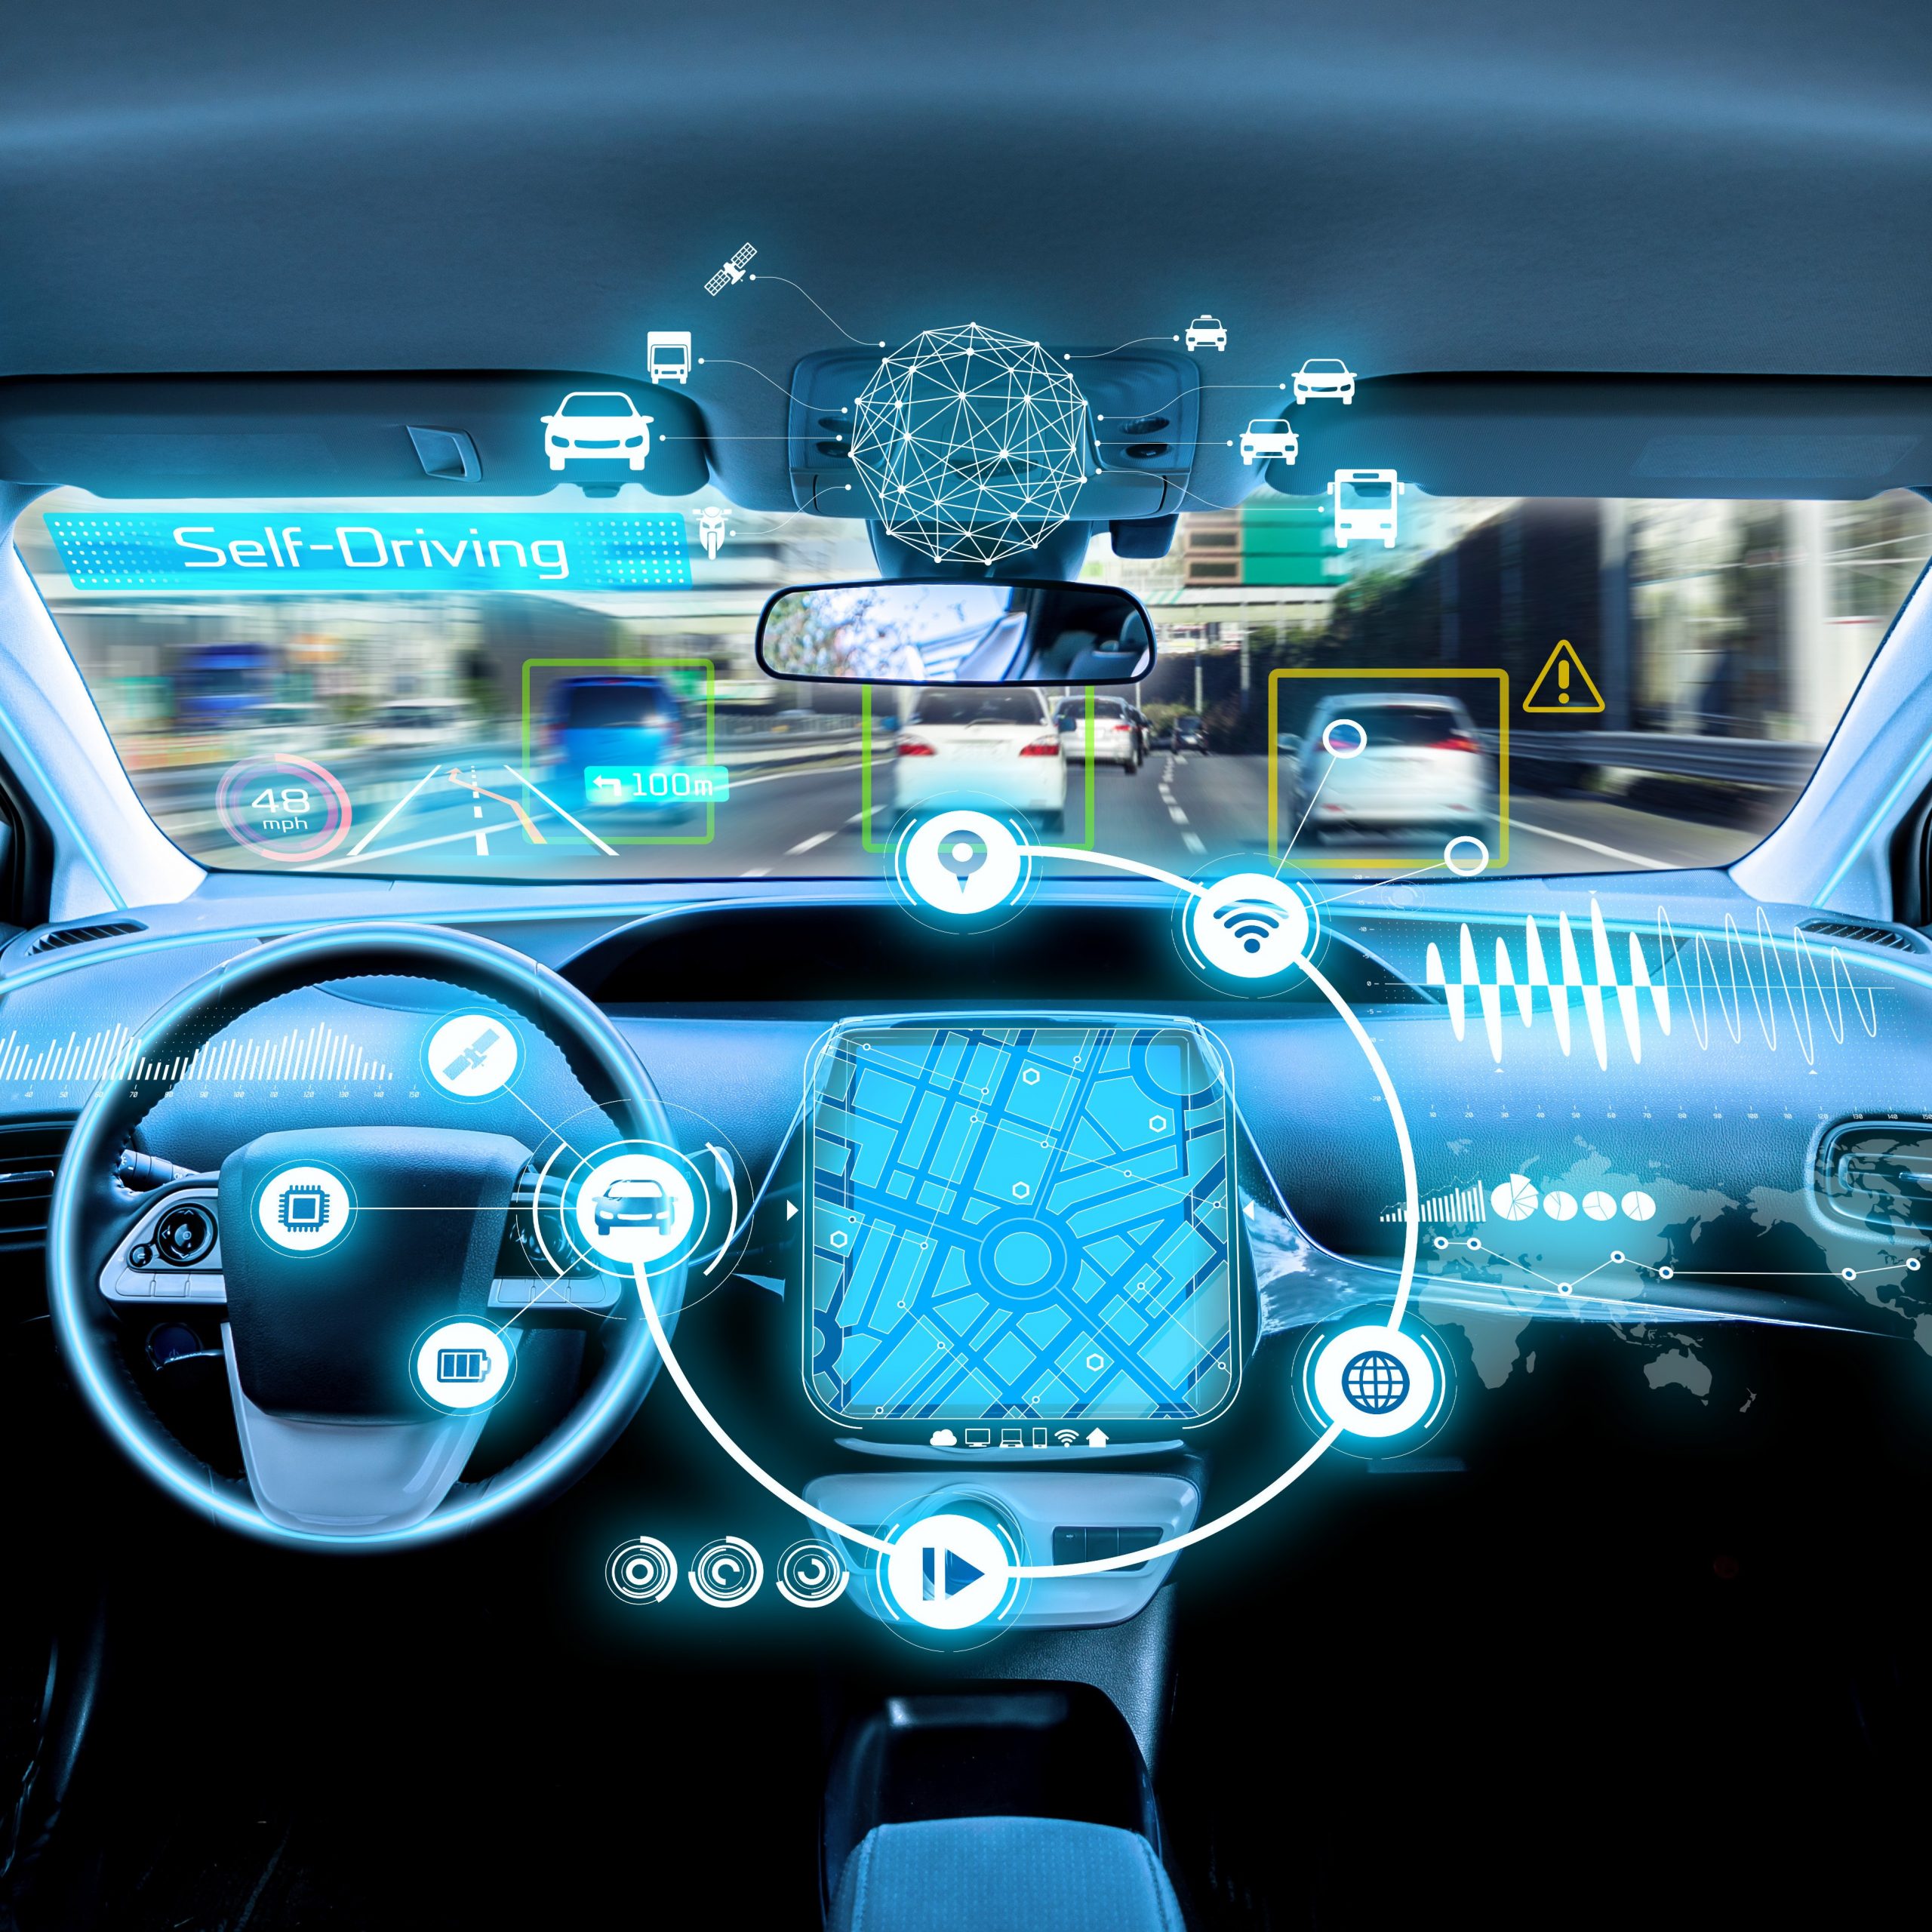 A computerised image of a left-hand drive autonomous vehicle. The image shows the steering wheel and dashboard, with holographic connections between the car and other vehicles visible through the windscreen.